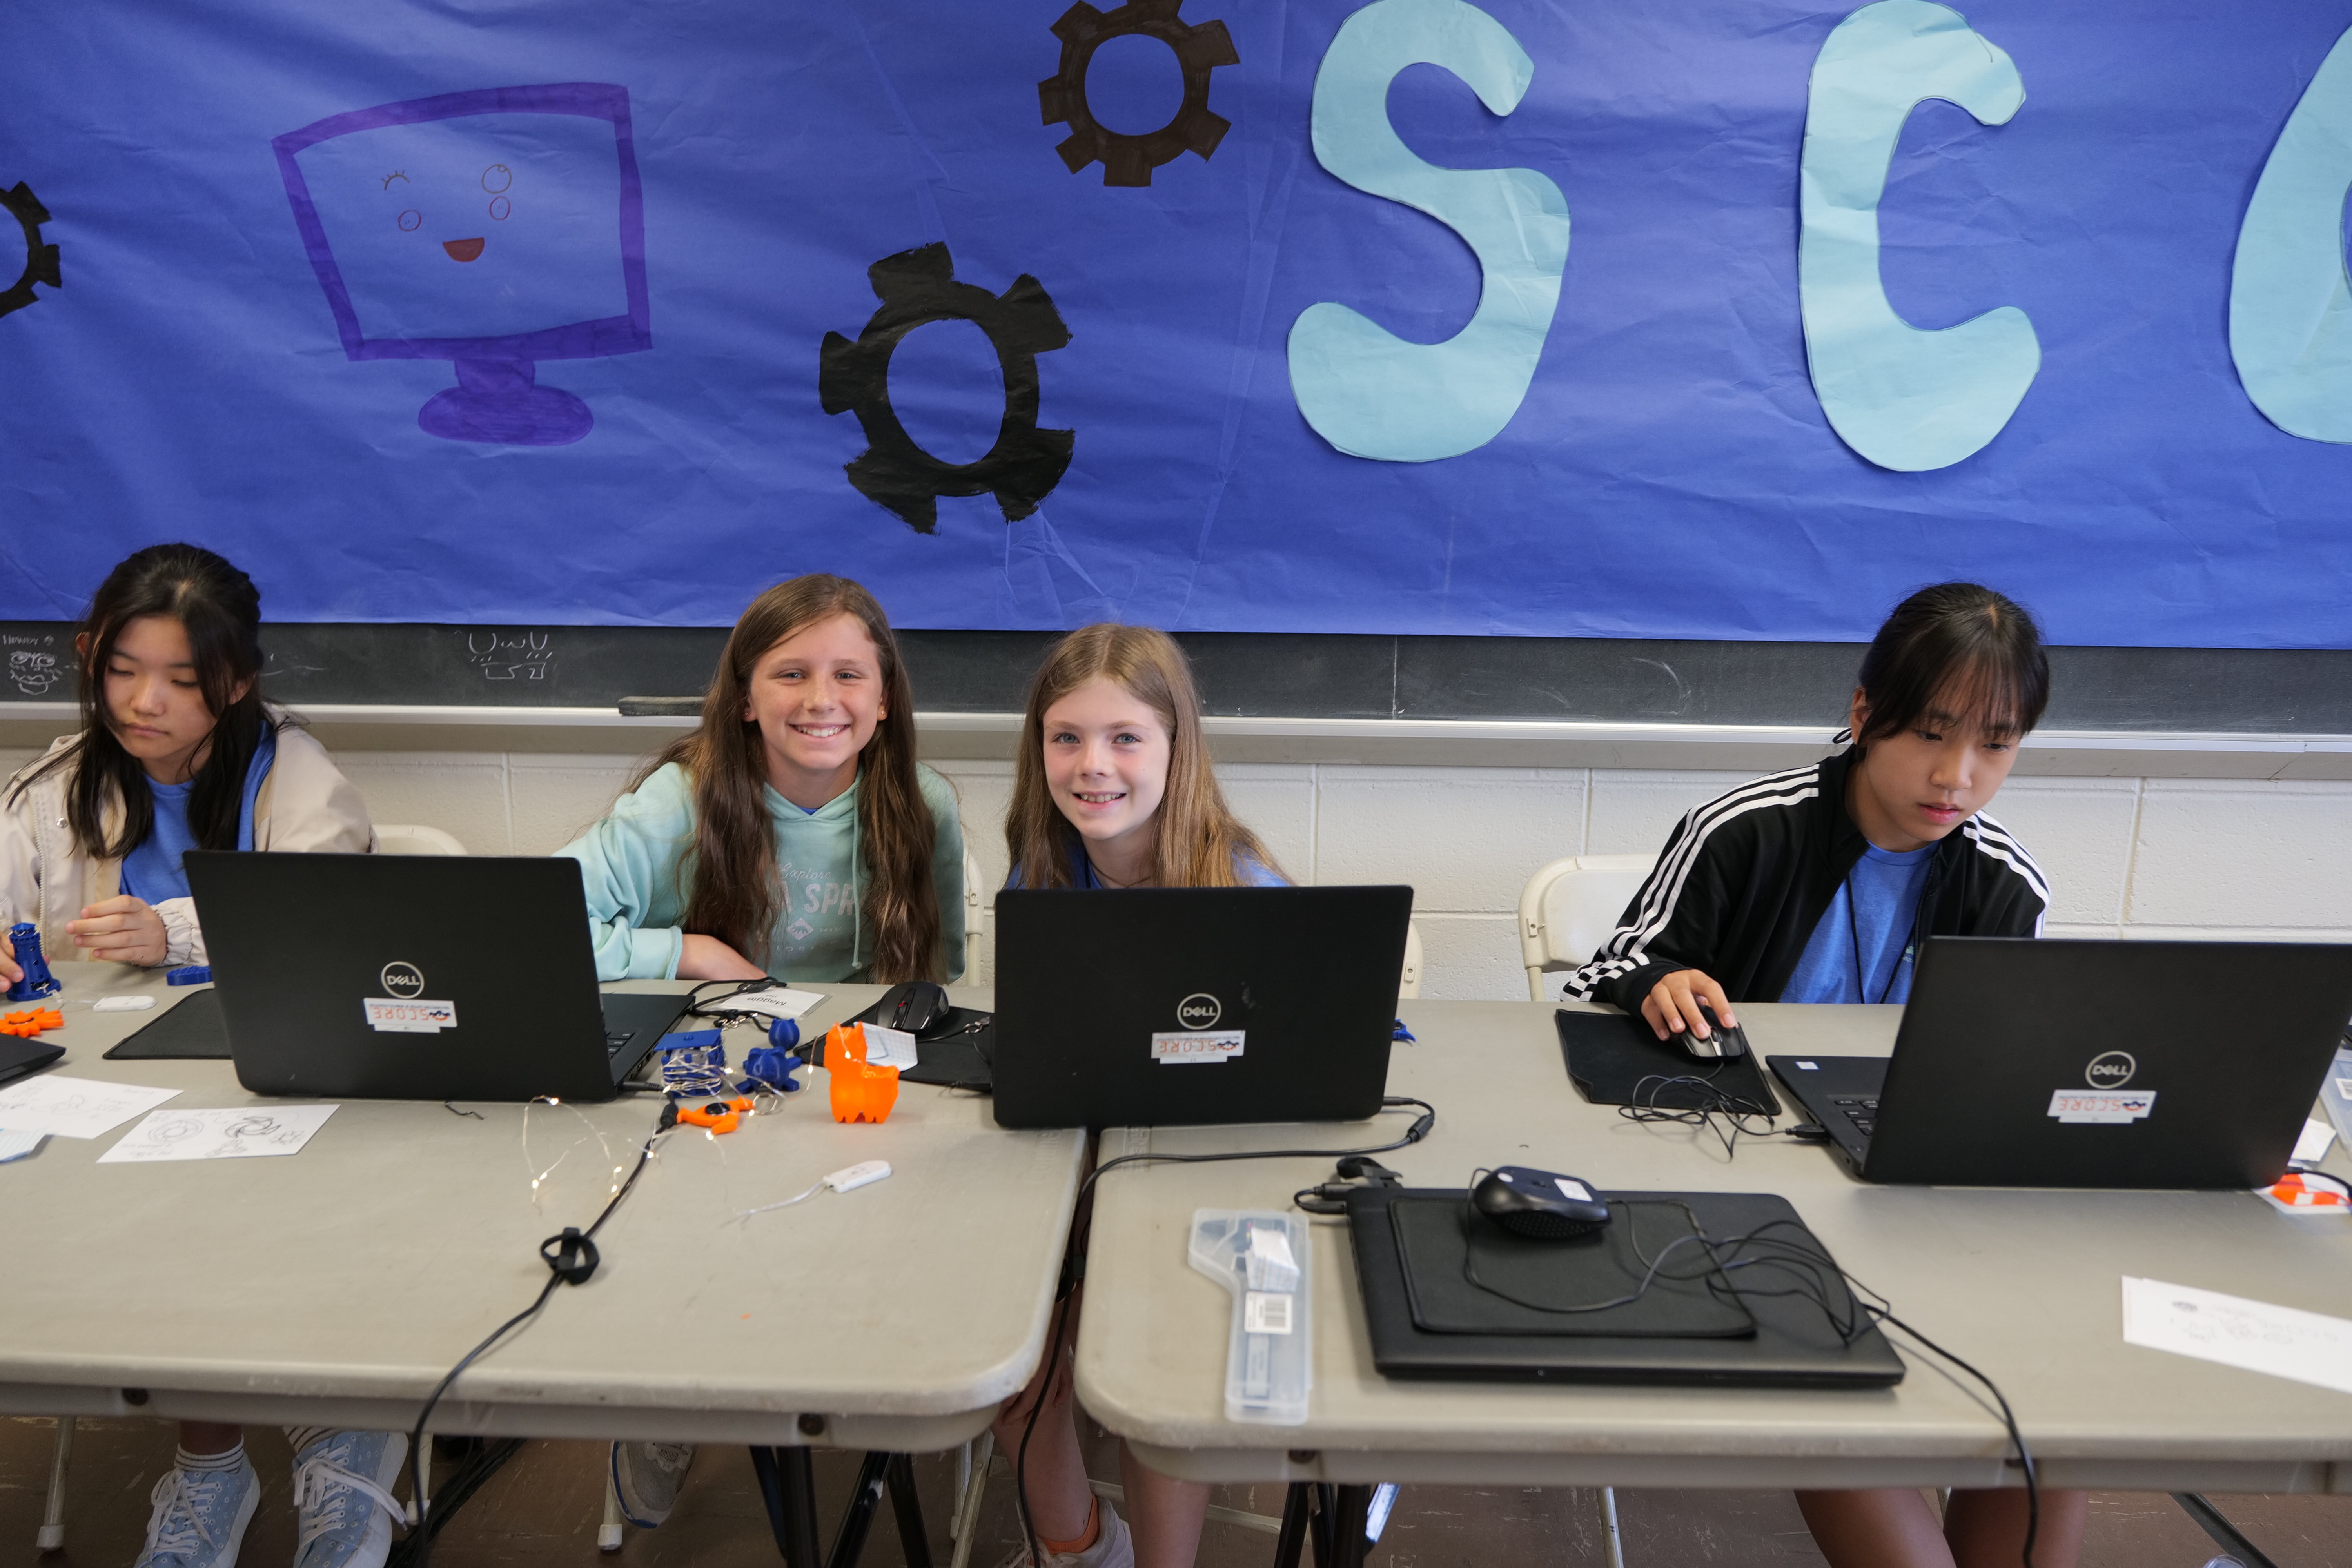 SCORE Summer Spotlight: Students learn how to create and print using 3D printers